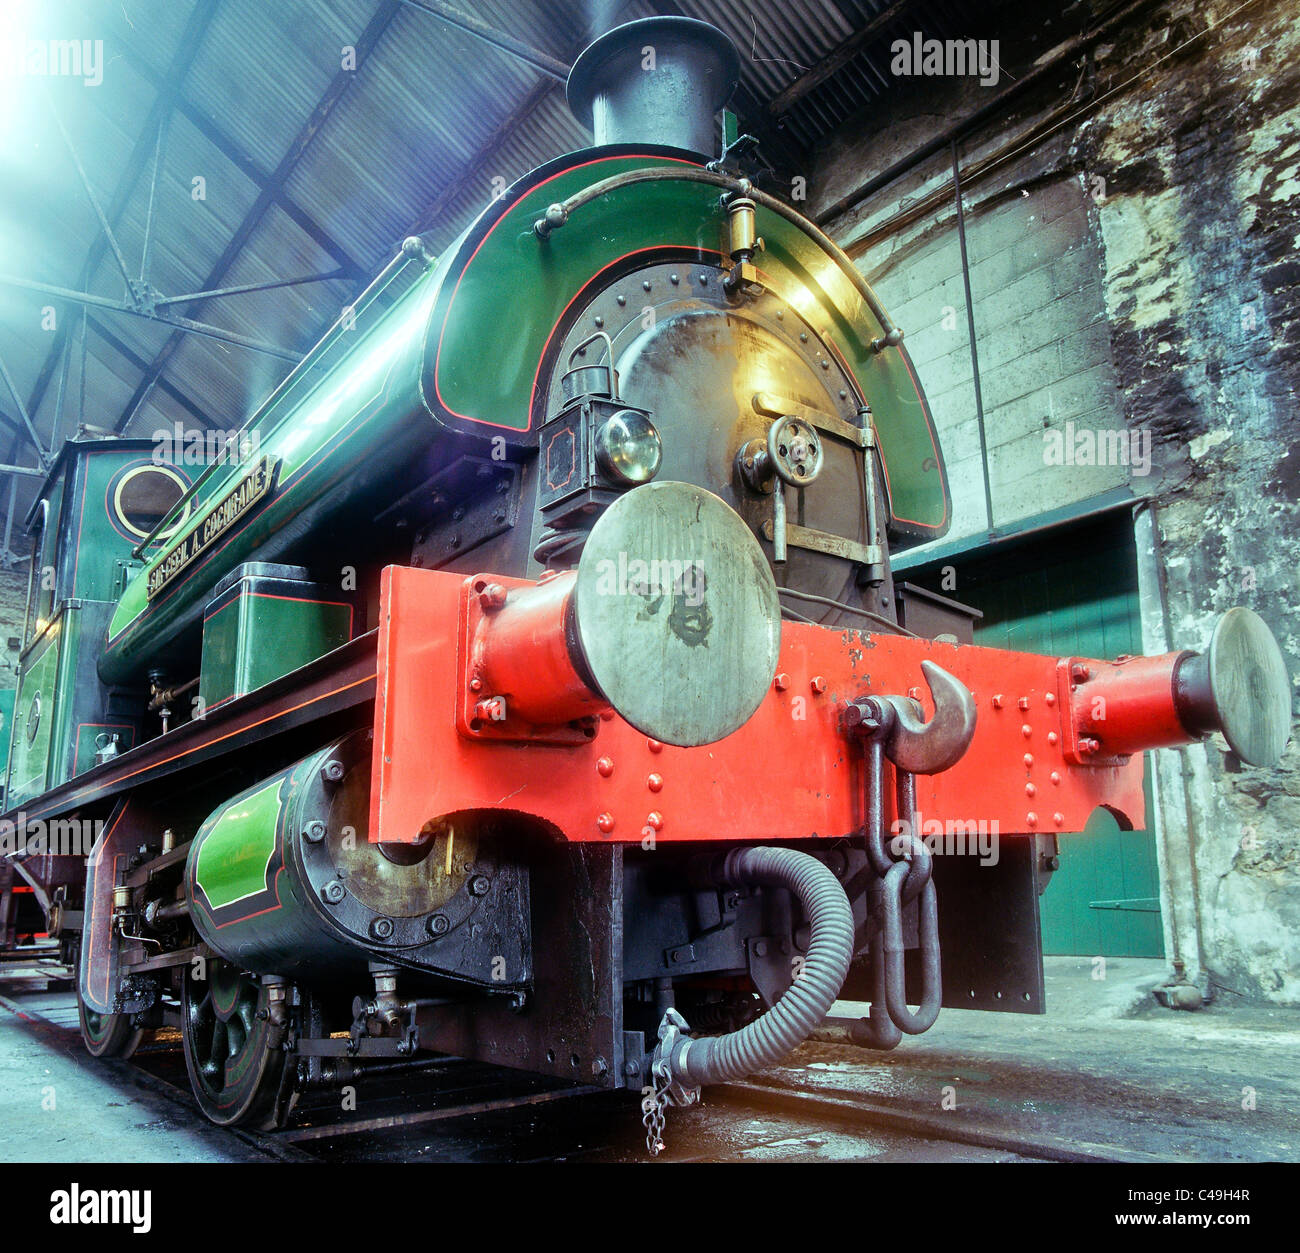 The steam engine 'Sir Cecil A Cochrane' in the engine shed at Tanfield Railway Stock Photo